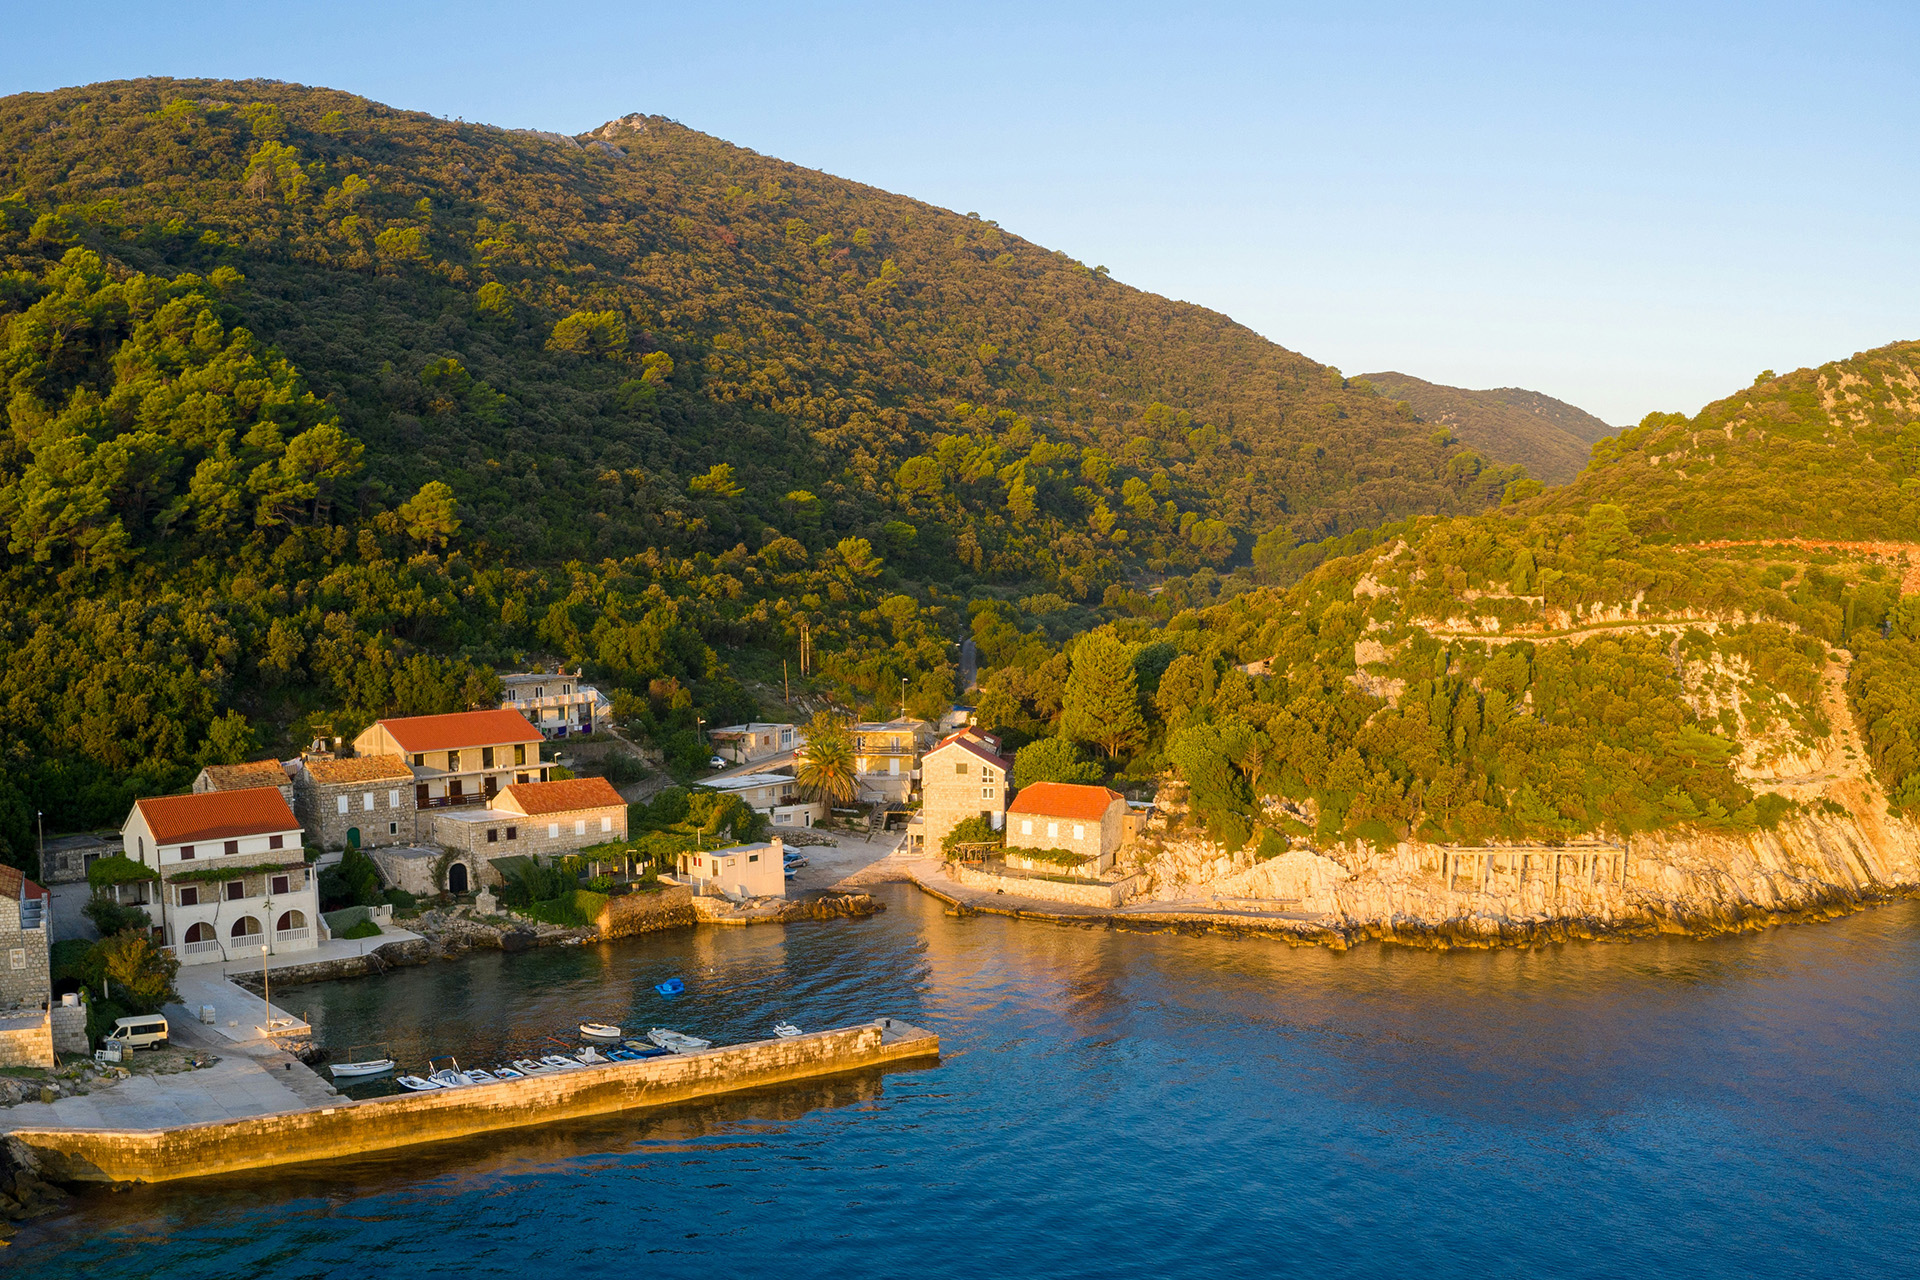 View of a port in the island of Mljet, Croatia